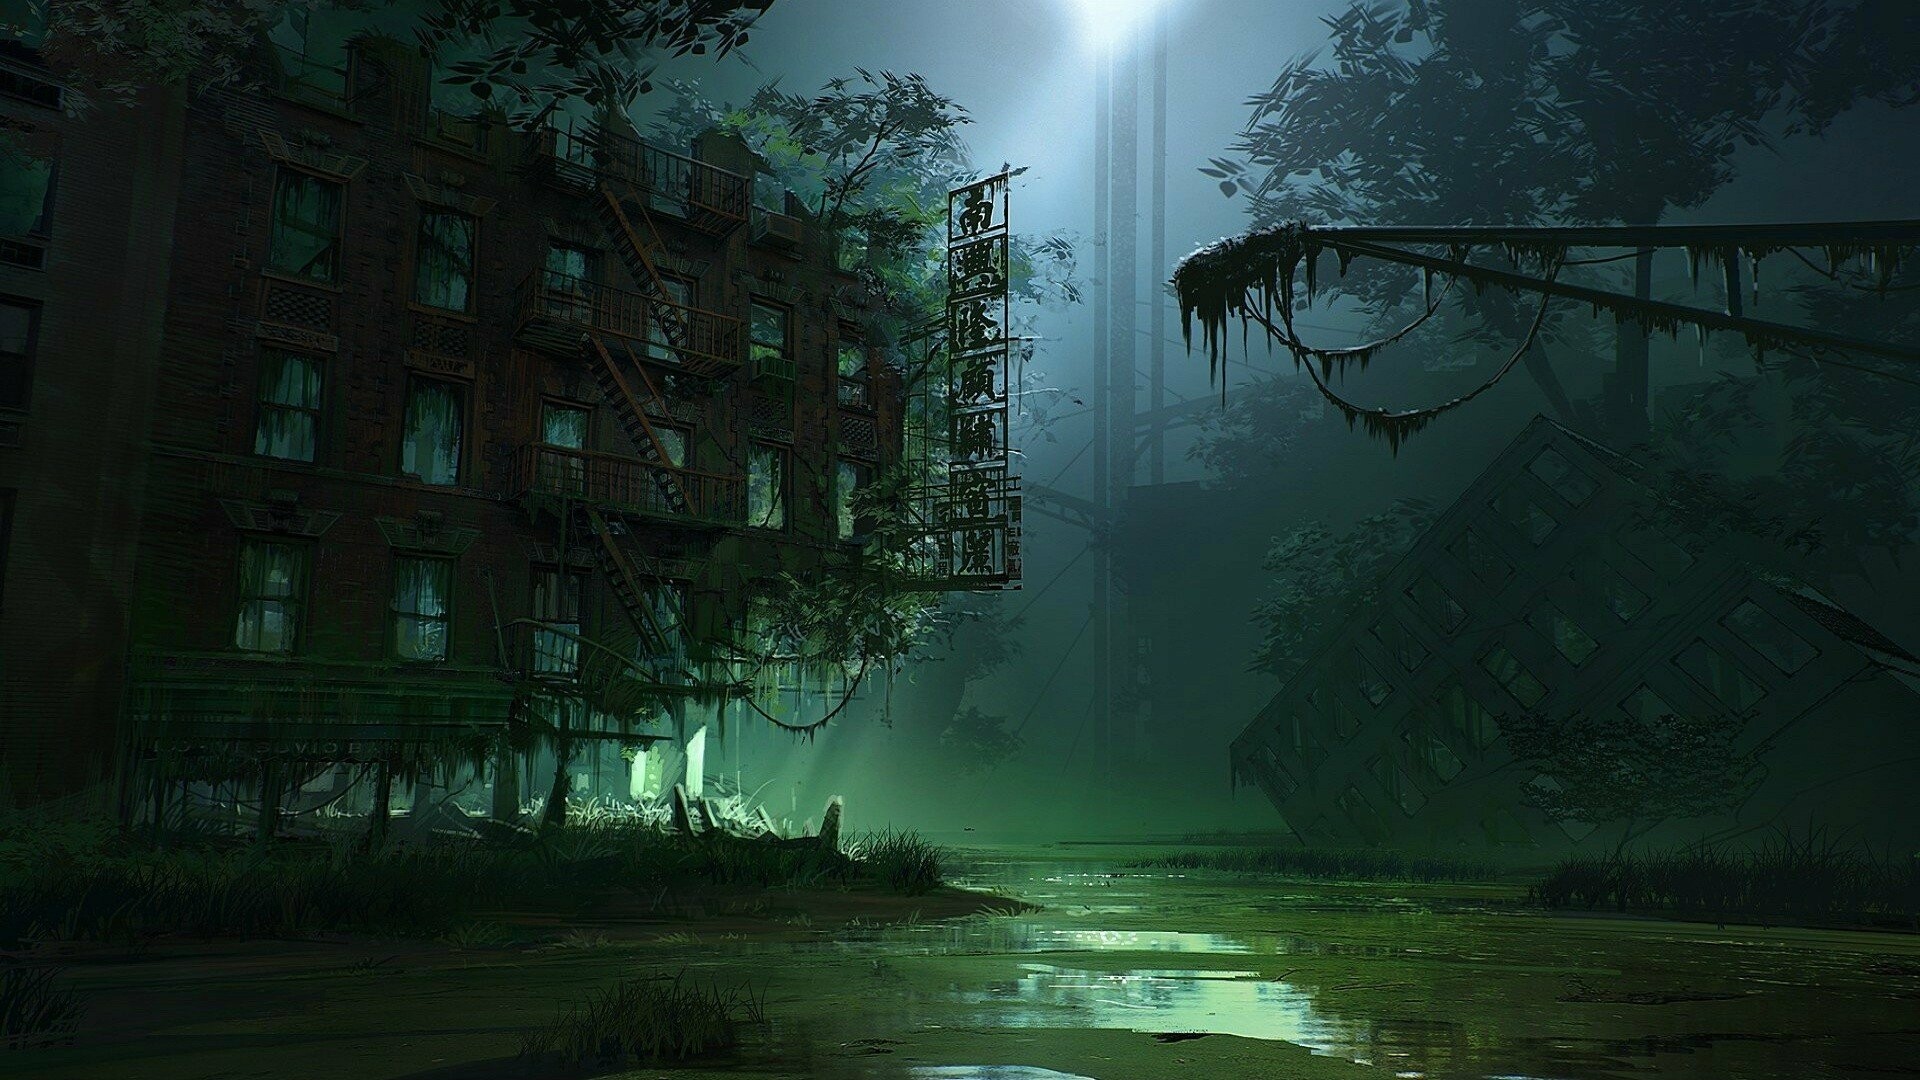 Post-apocalypse: Abandoned cities full of wildlife, The decline of technology. 1920x1080 Full HD Wallpaper.